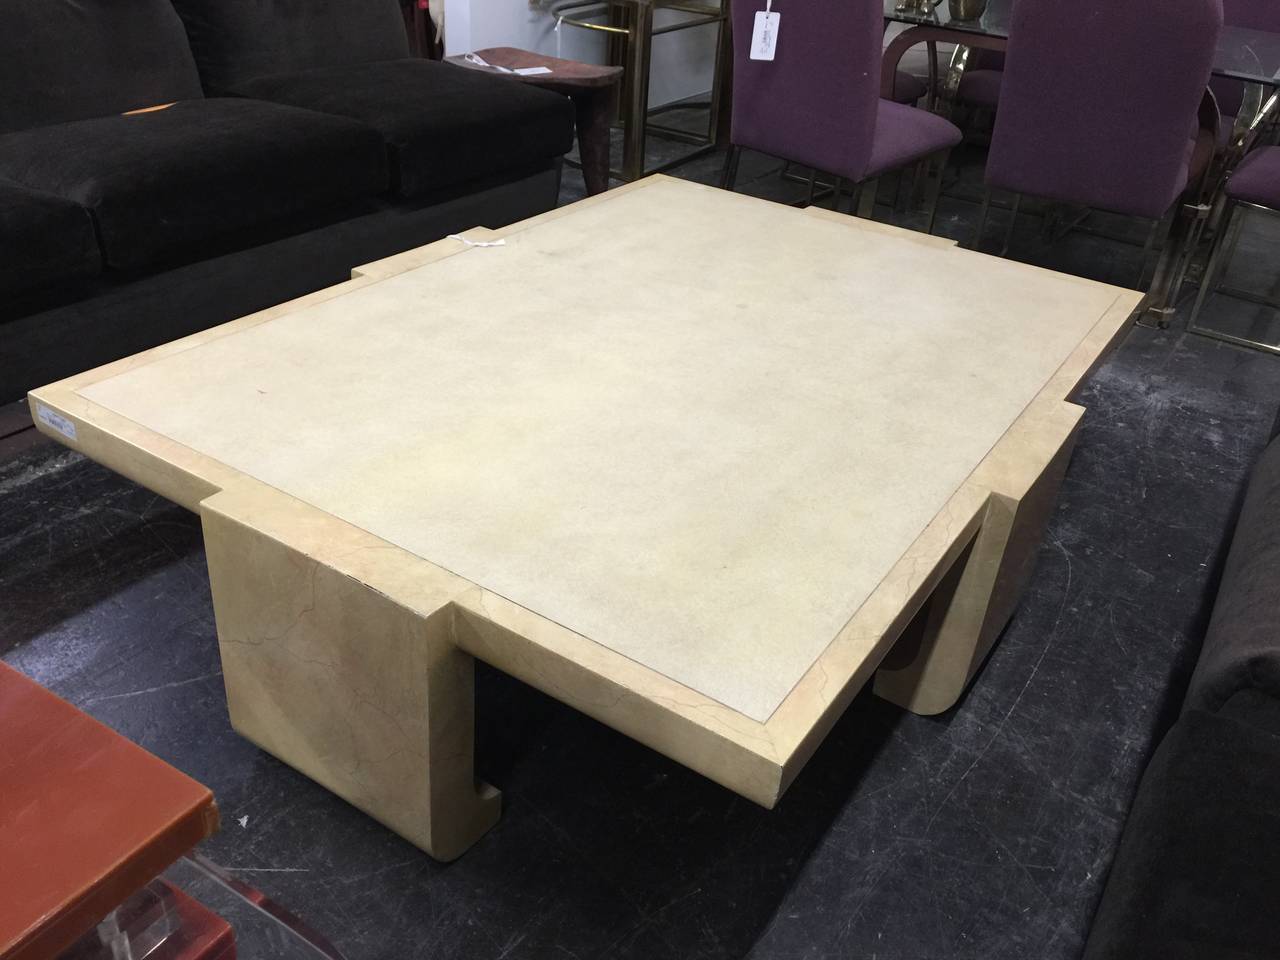 Asian style coffee table by Alessandro for Baker Co. This monumental coffee table is lacquered in beige goatskin around the body of the table with a textured top.

There is some loss around the joint area.

dimensions: 66